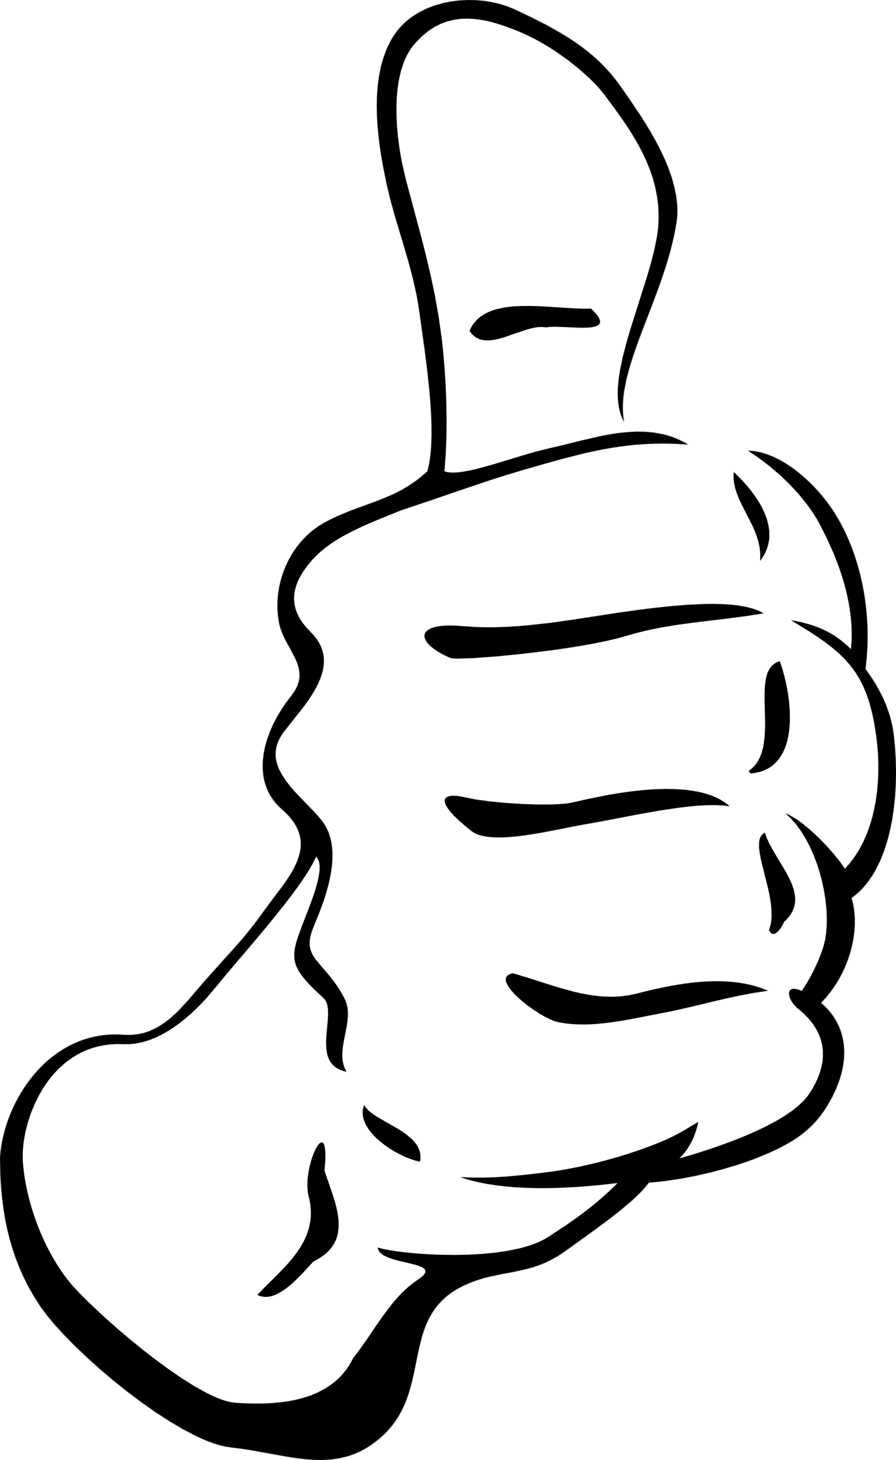 Thumbs up transparent clipart